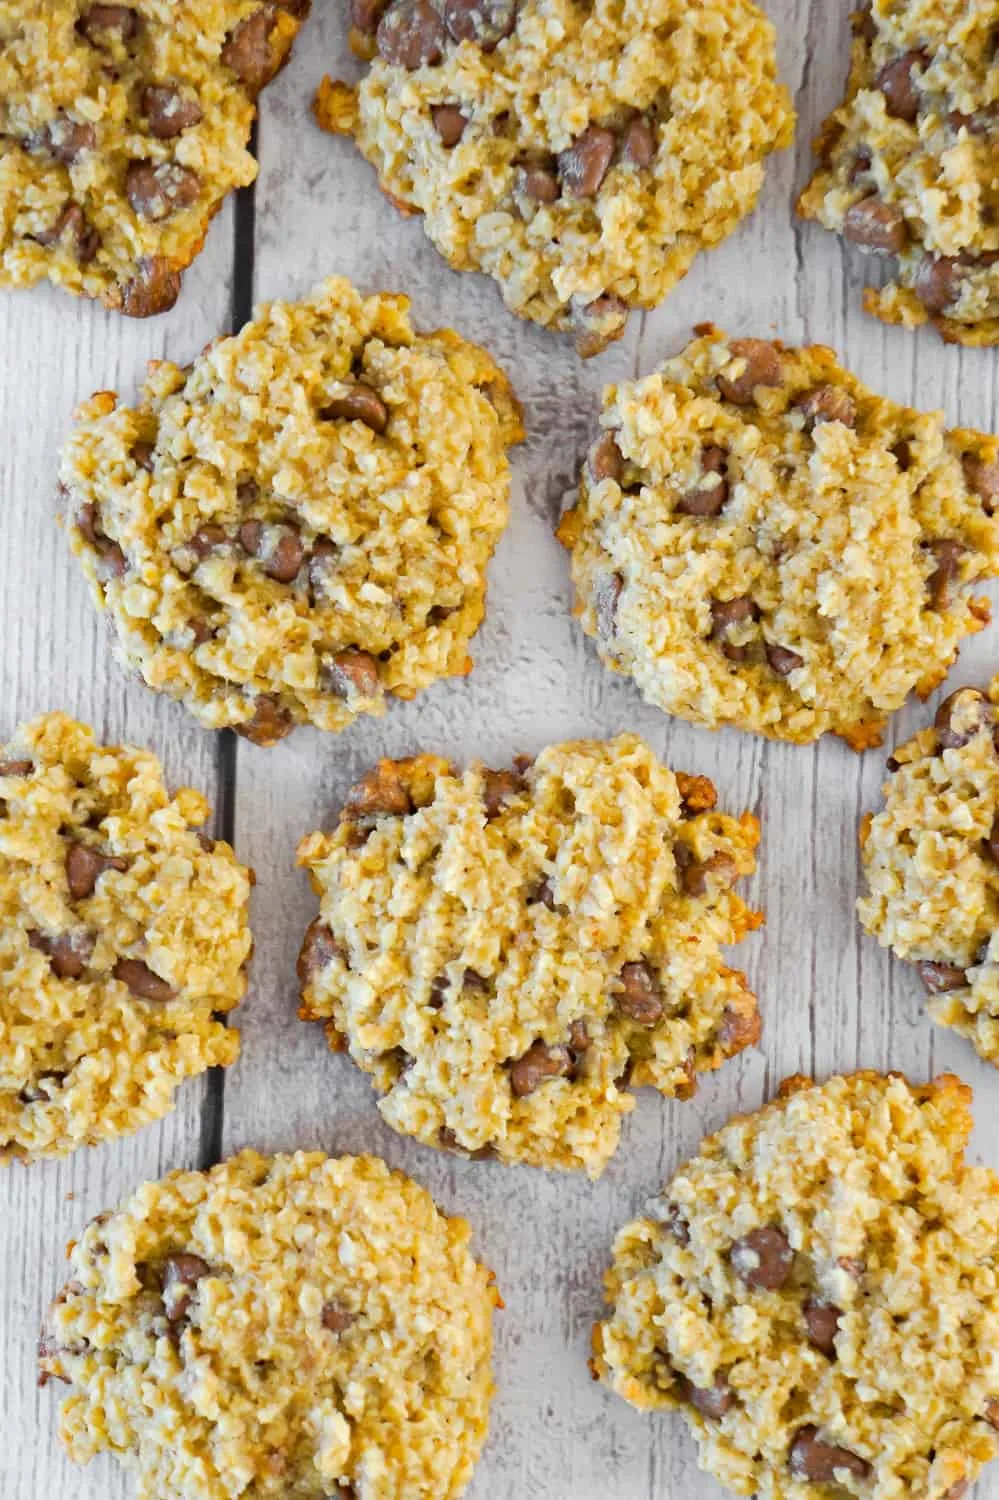 Banana Oatmeal Cookies are an easy flourless cookie recipe. These chewy oatmeal cookies are loaded with milk chocolate chips.